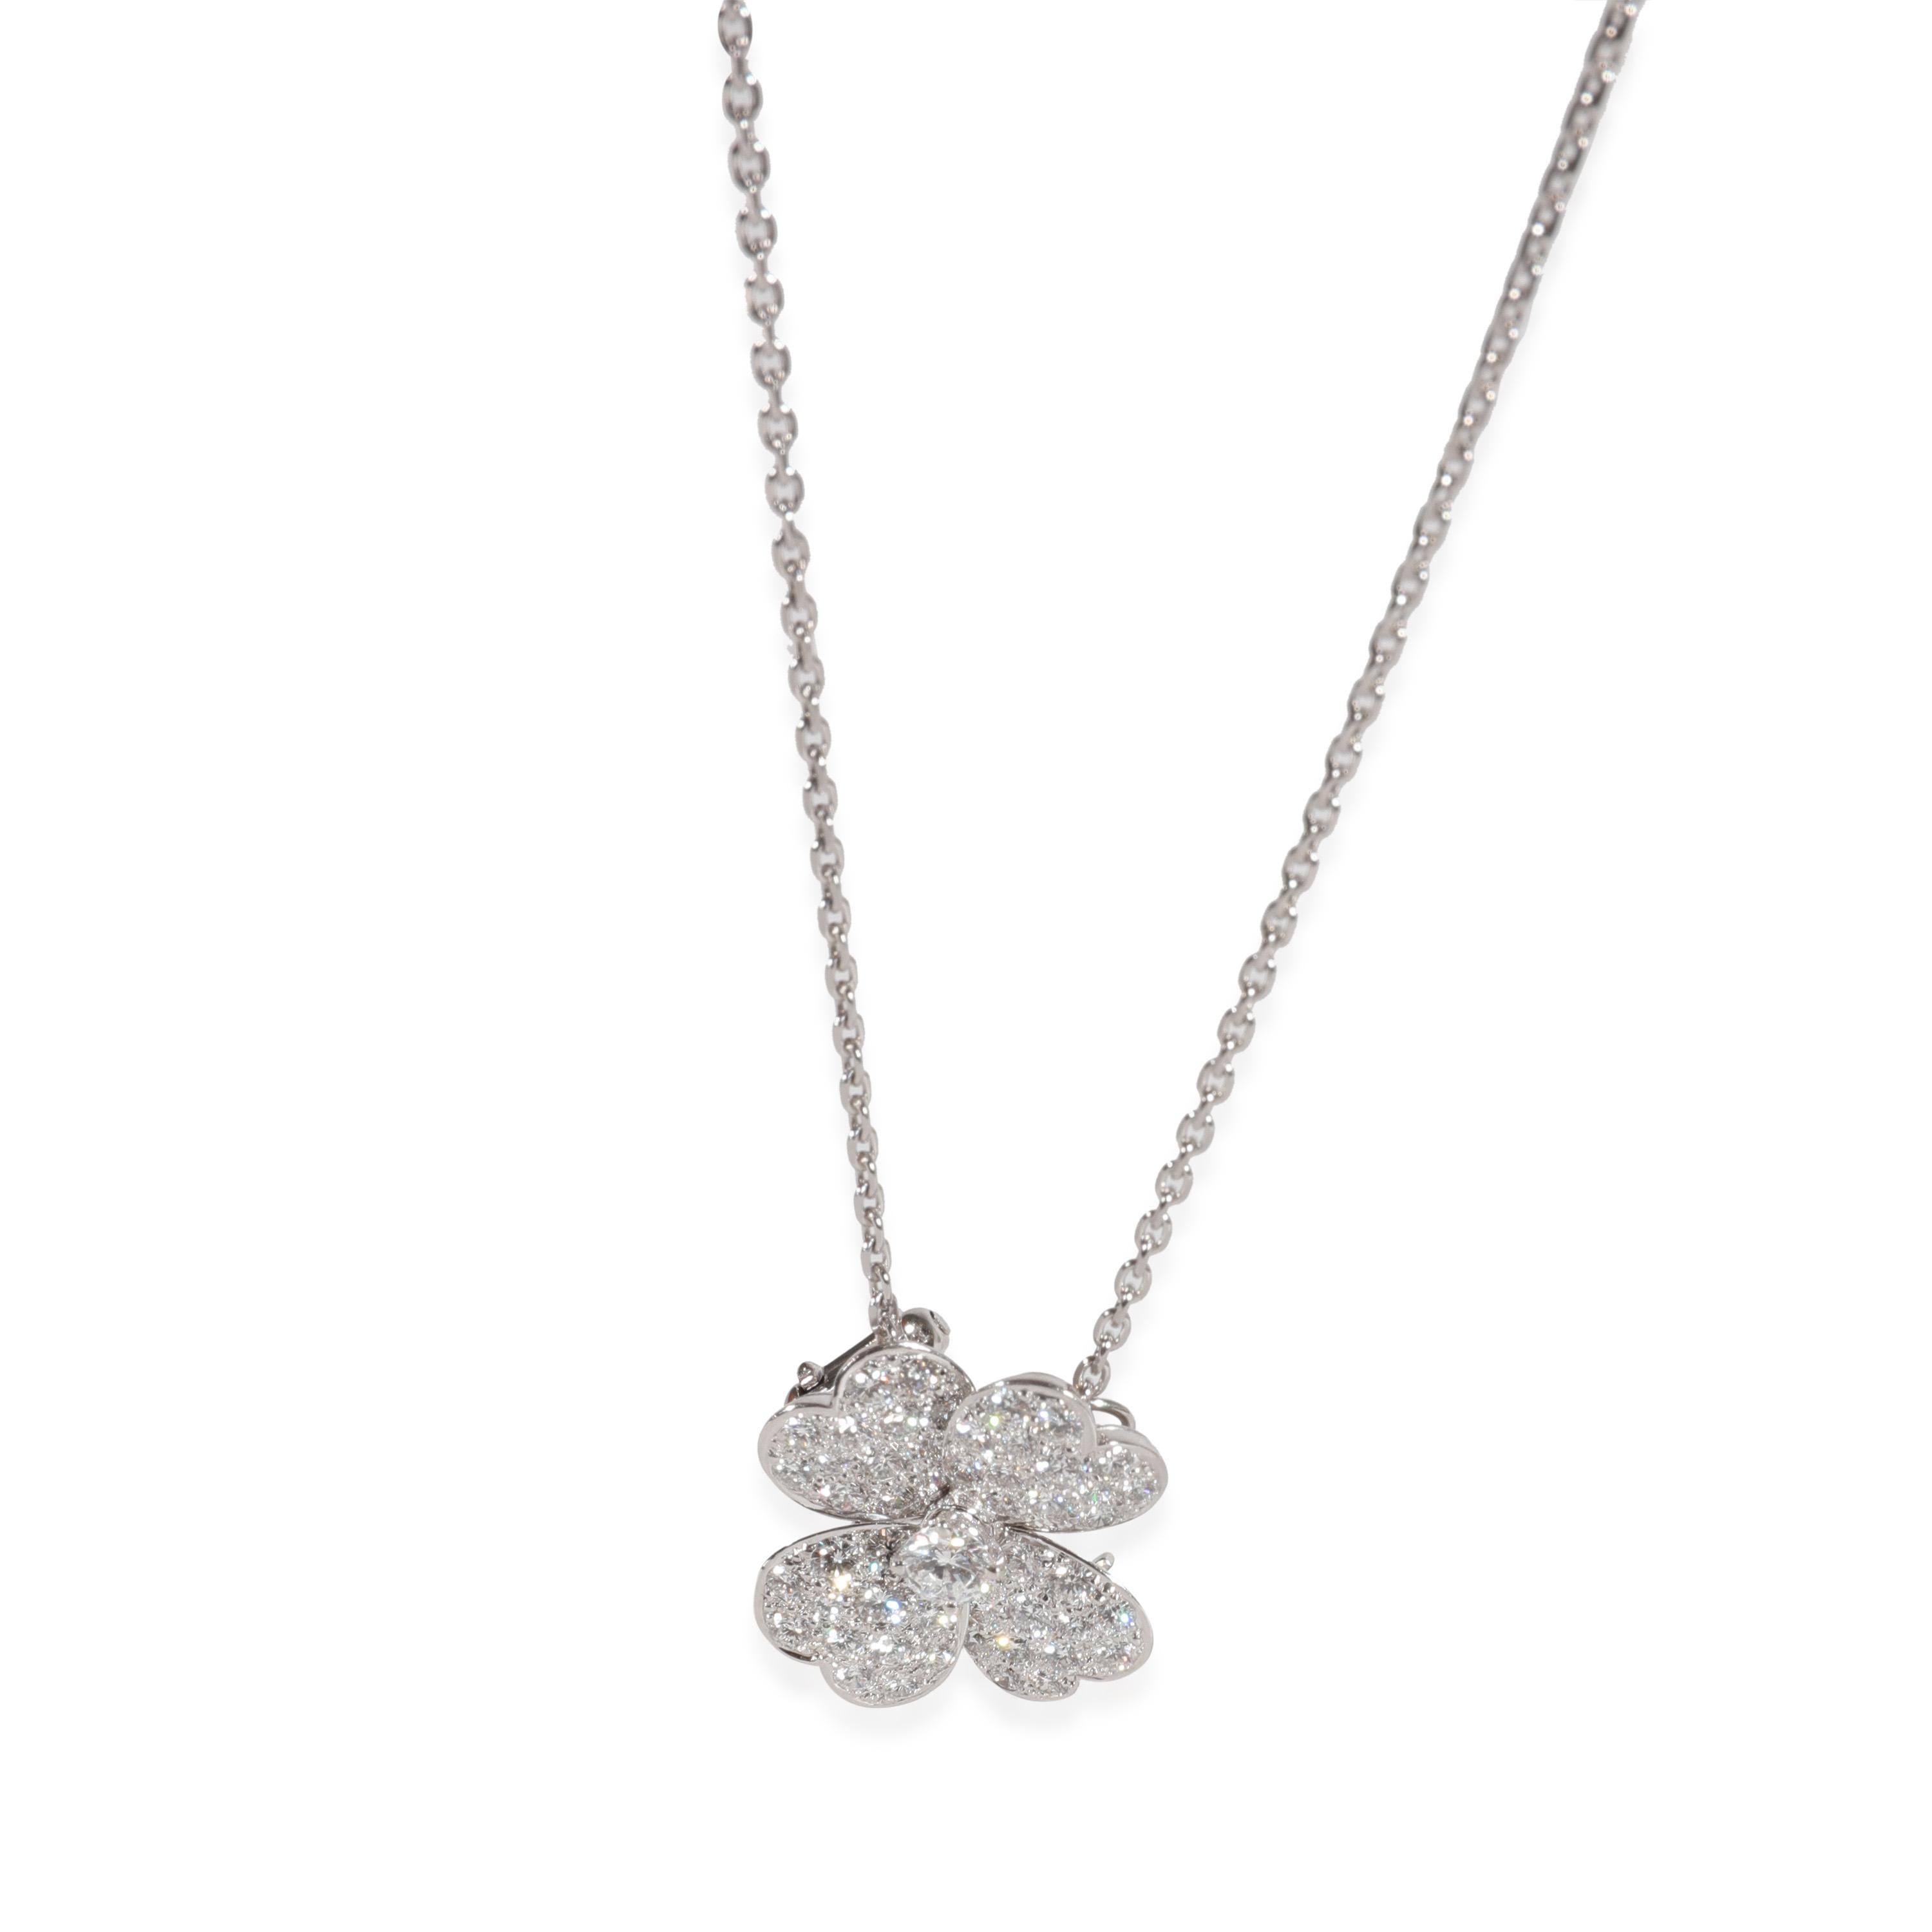 Van Cleef & Arpels Cosmos Diamond Pendant/Pin in 18K White Gold 1.57 CTW

PRIMARY DETAILS
SKU: 123403
Listing Title: Van Cleef & Arpels Cosmos Diamond Pendant/Pin in 18K White Gold 1.57 CTW
Condition Description: Retails for 23300 USD. In excellent